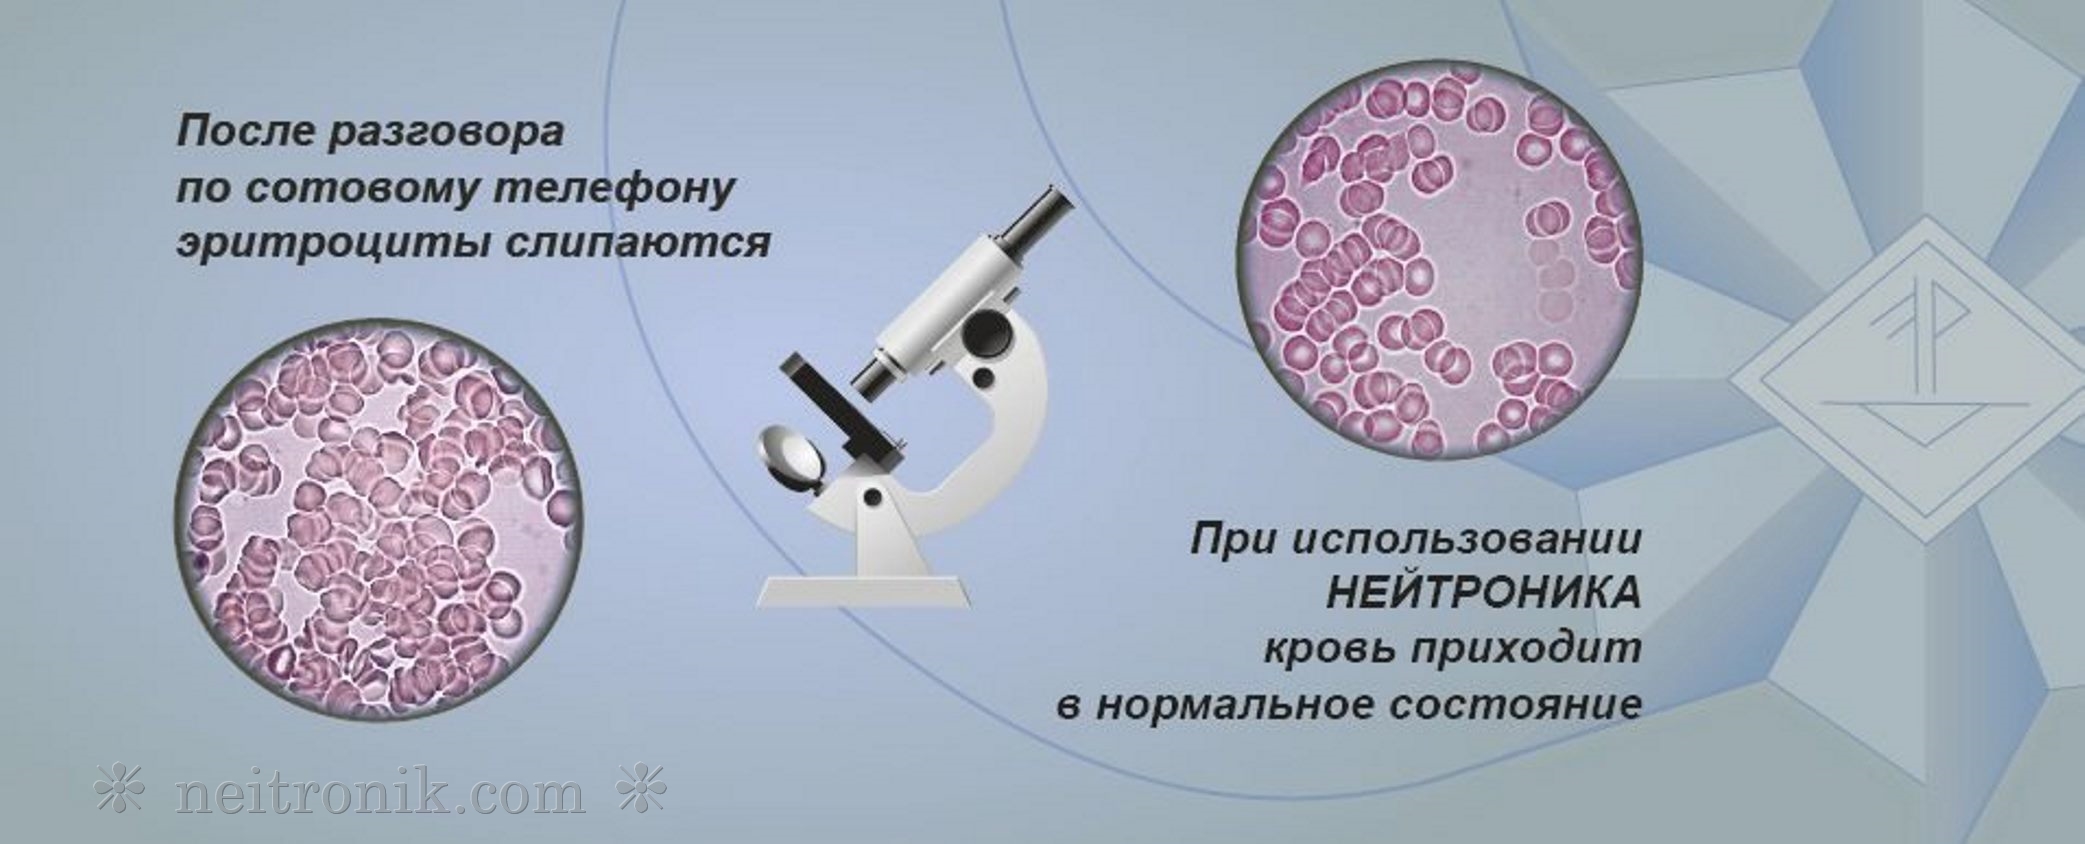 Neitronik restores the reference blood composition